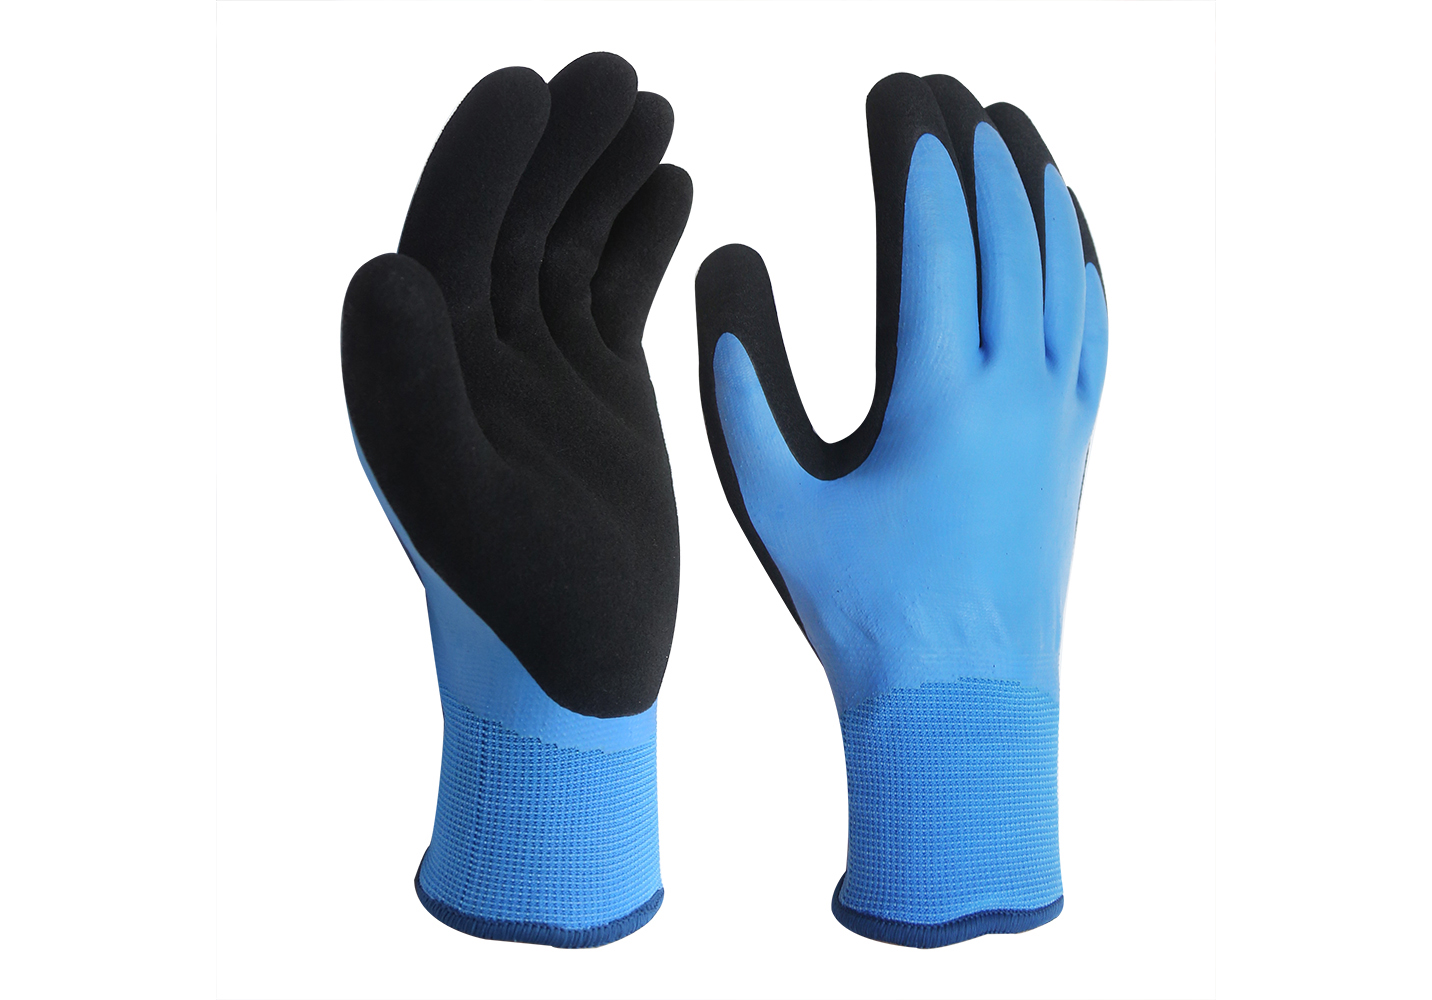 LCG-017 Waterproof 15G Nylon Gloves with Double Latex Coated